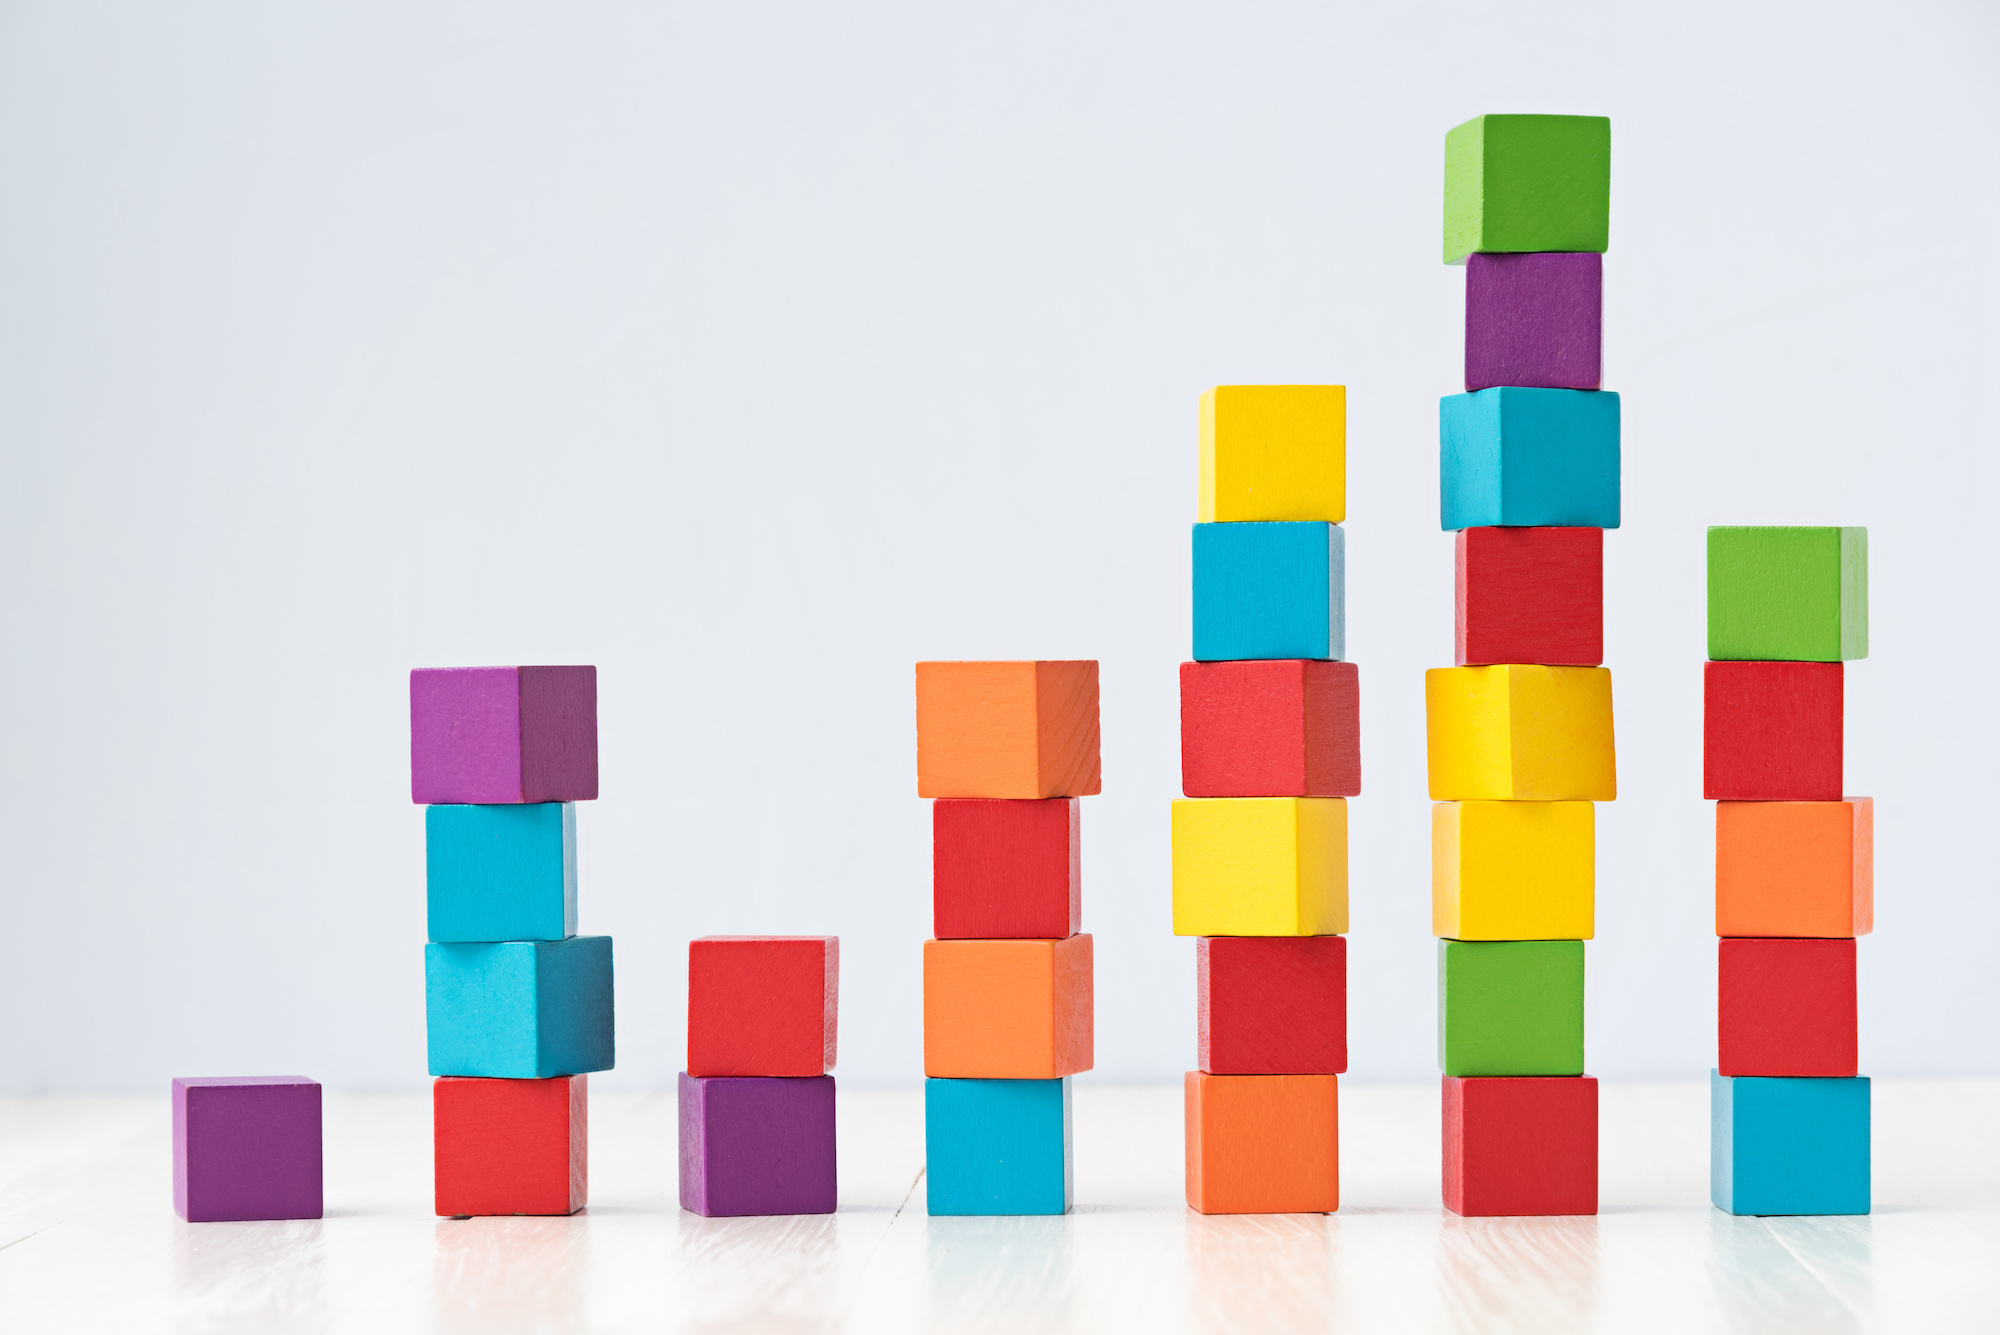 Photograph of seven stacks of colorful blocks of varying heights